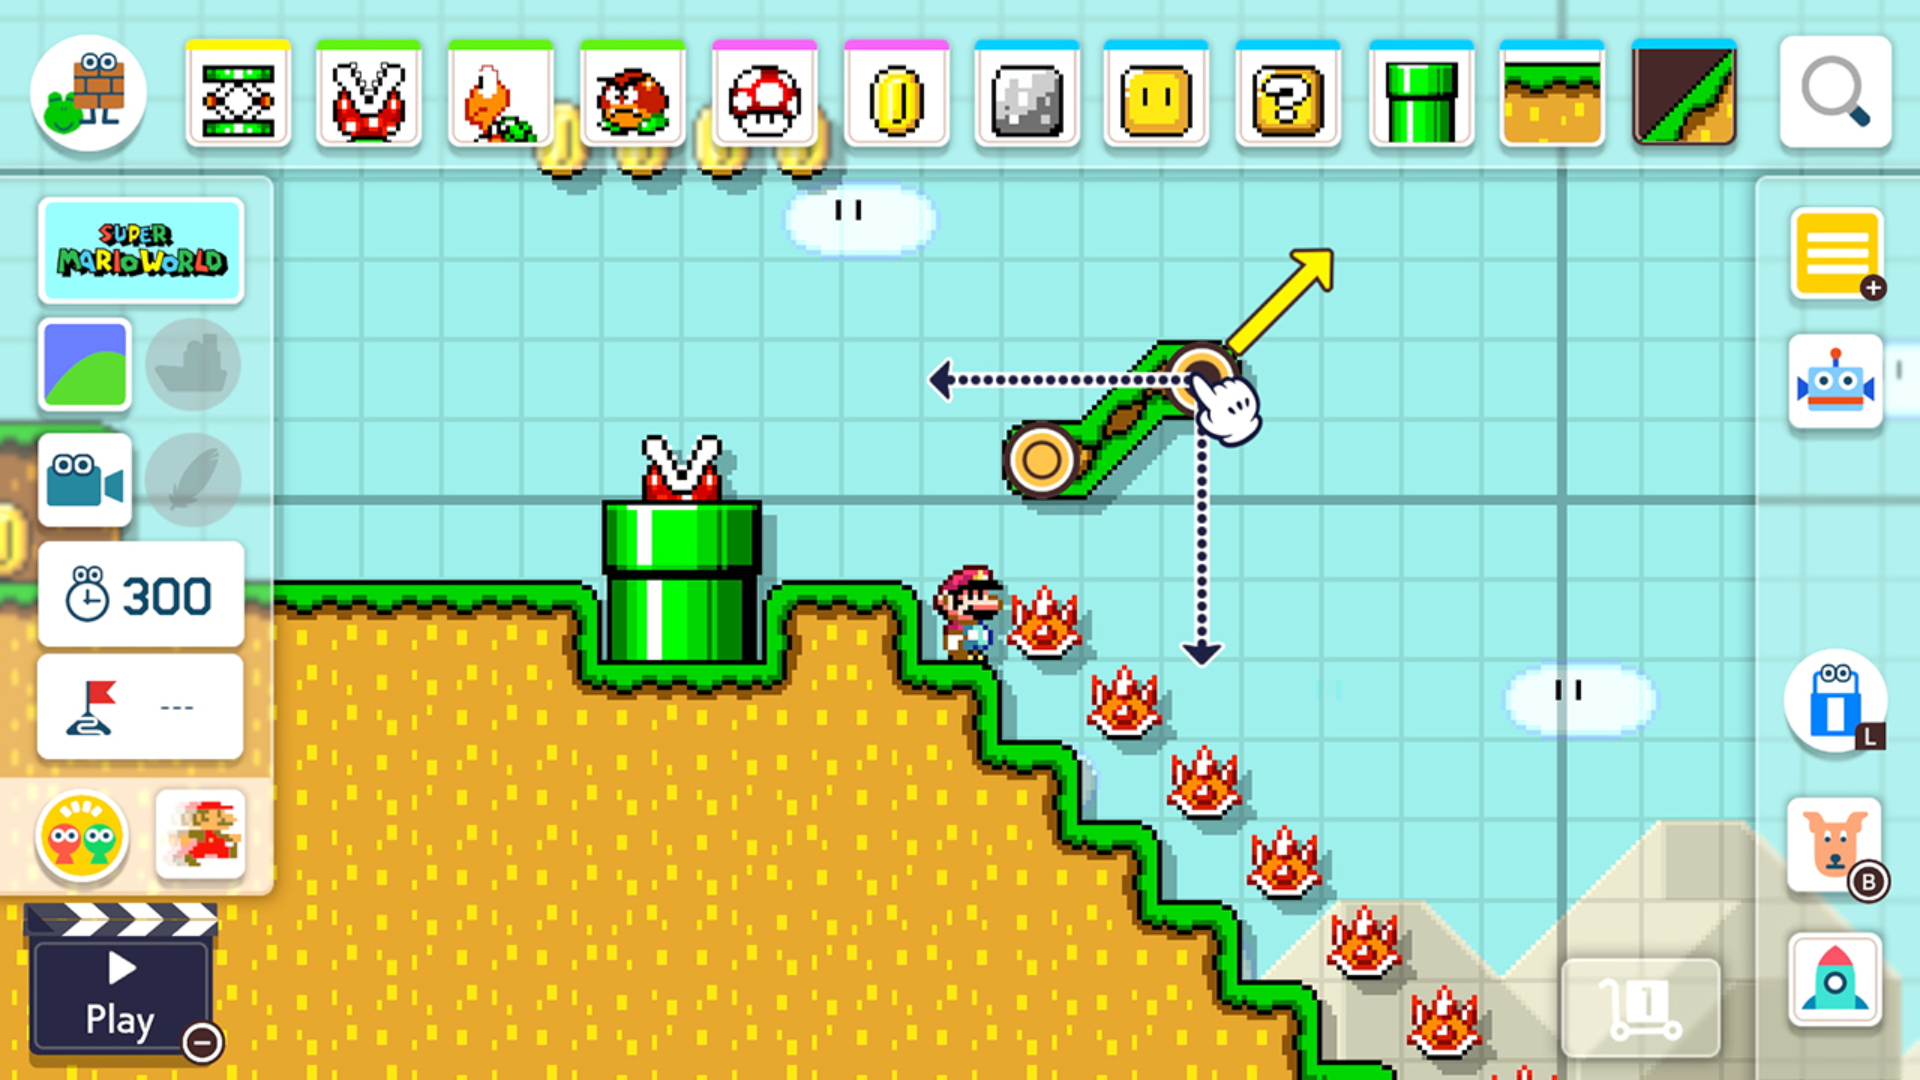 Educational games - Someone creating their own Mario game